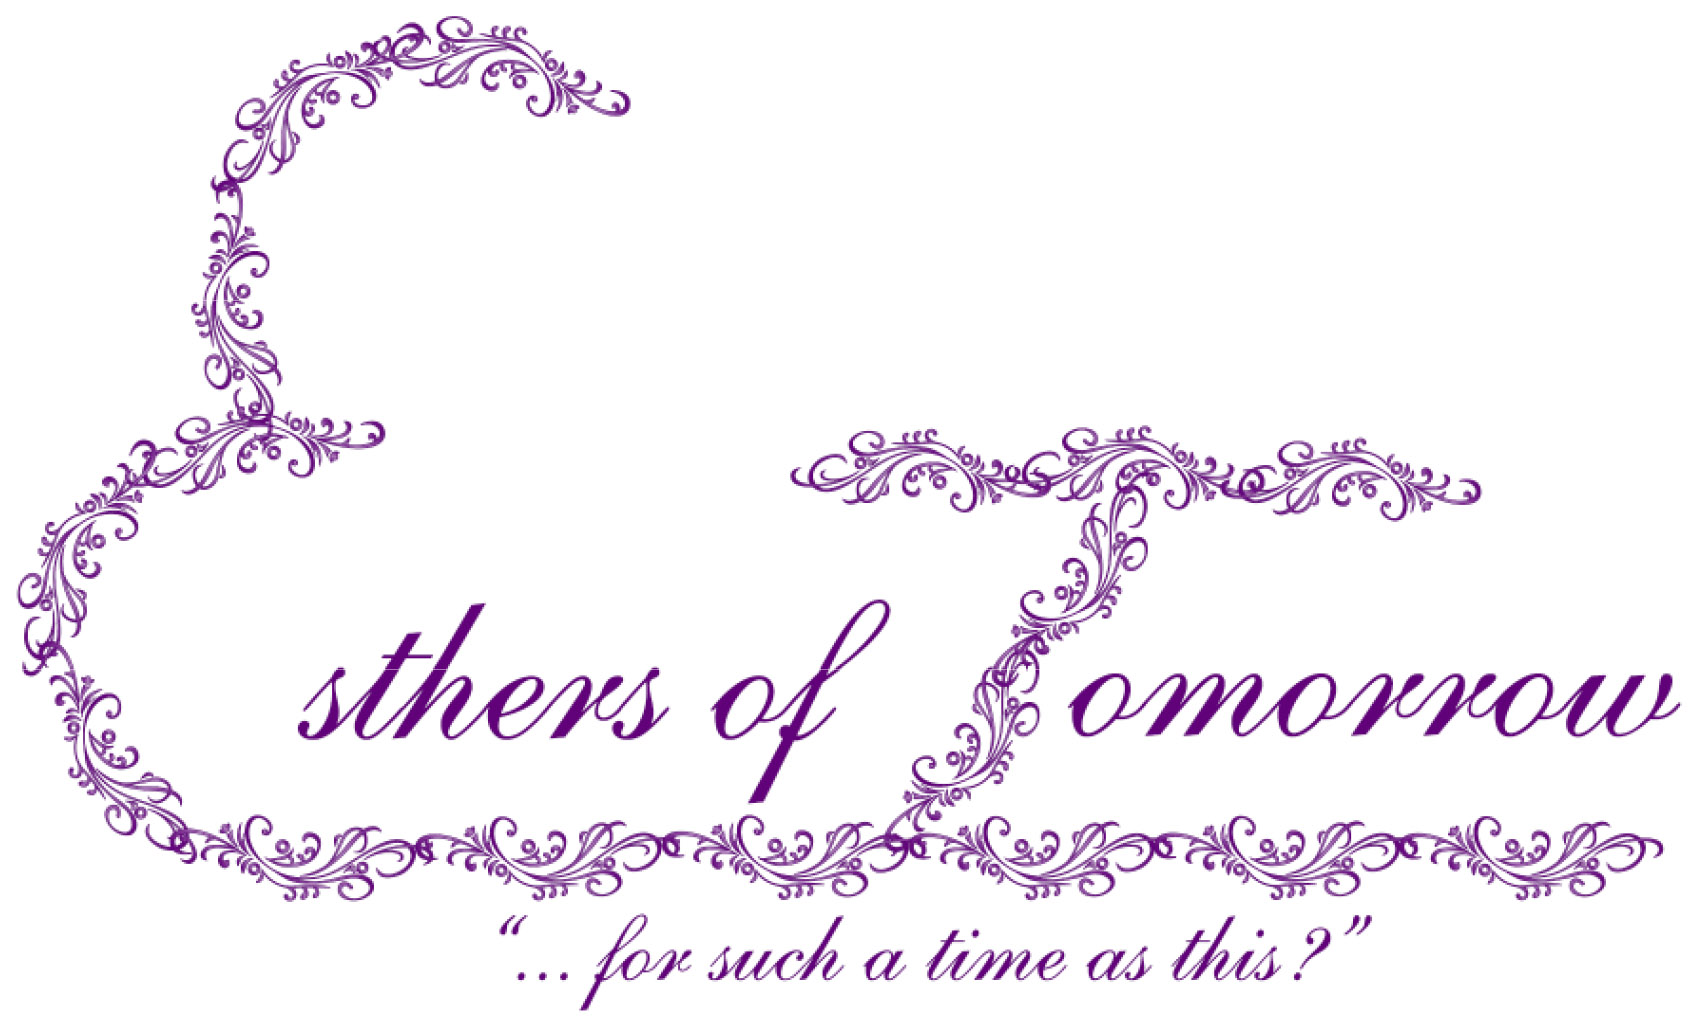 A purple and white logo for the mothers of tomorrow.